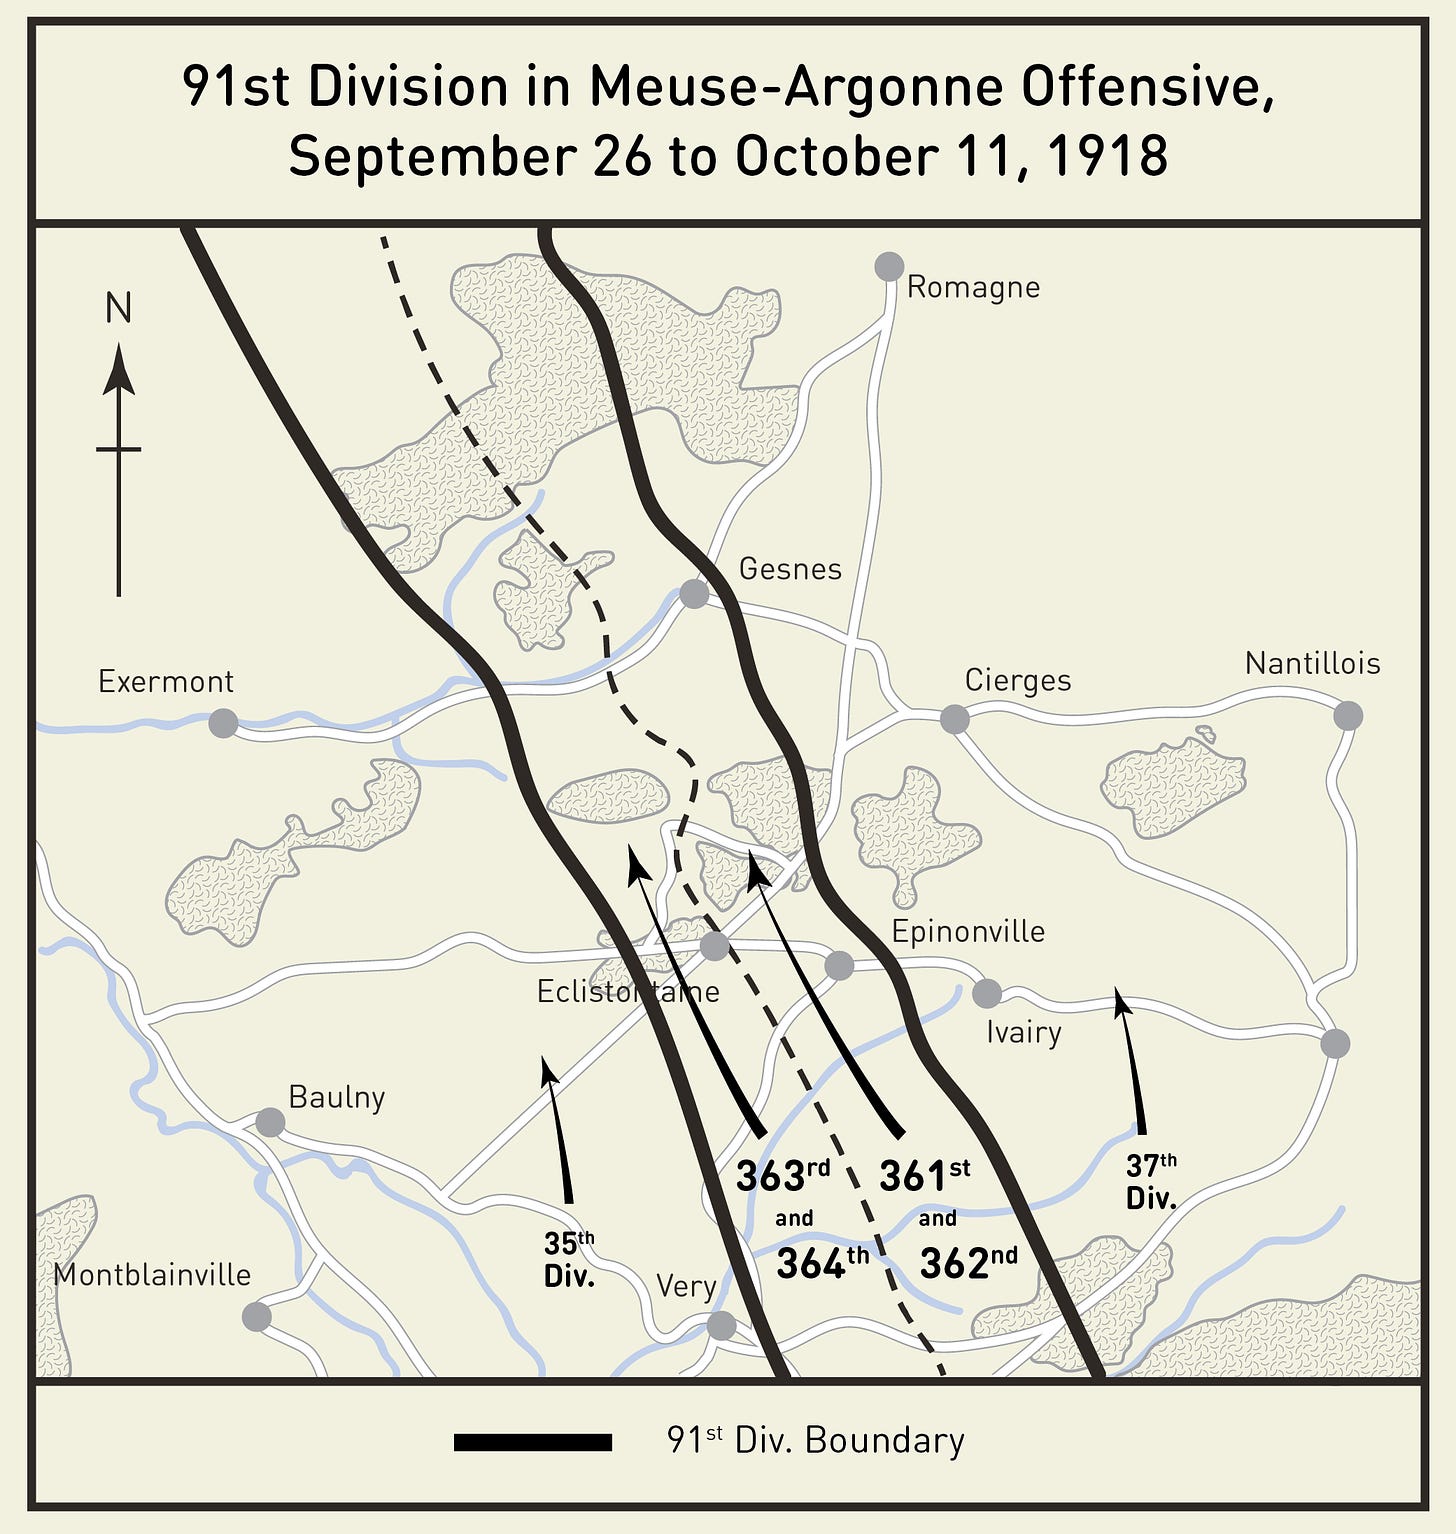 The alley for which the 91st Division was responsible In the Meuse-Argonne Offensive.